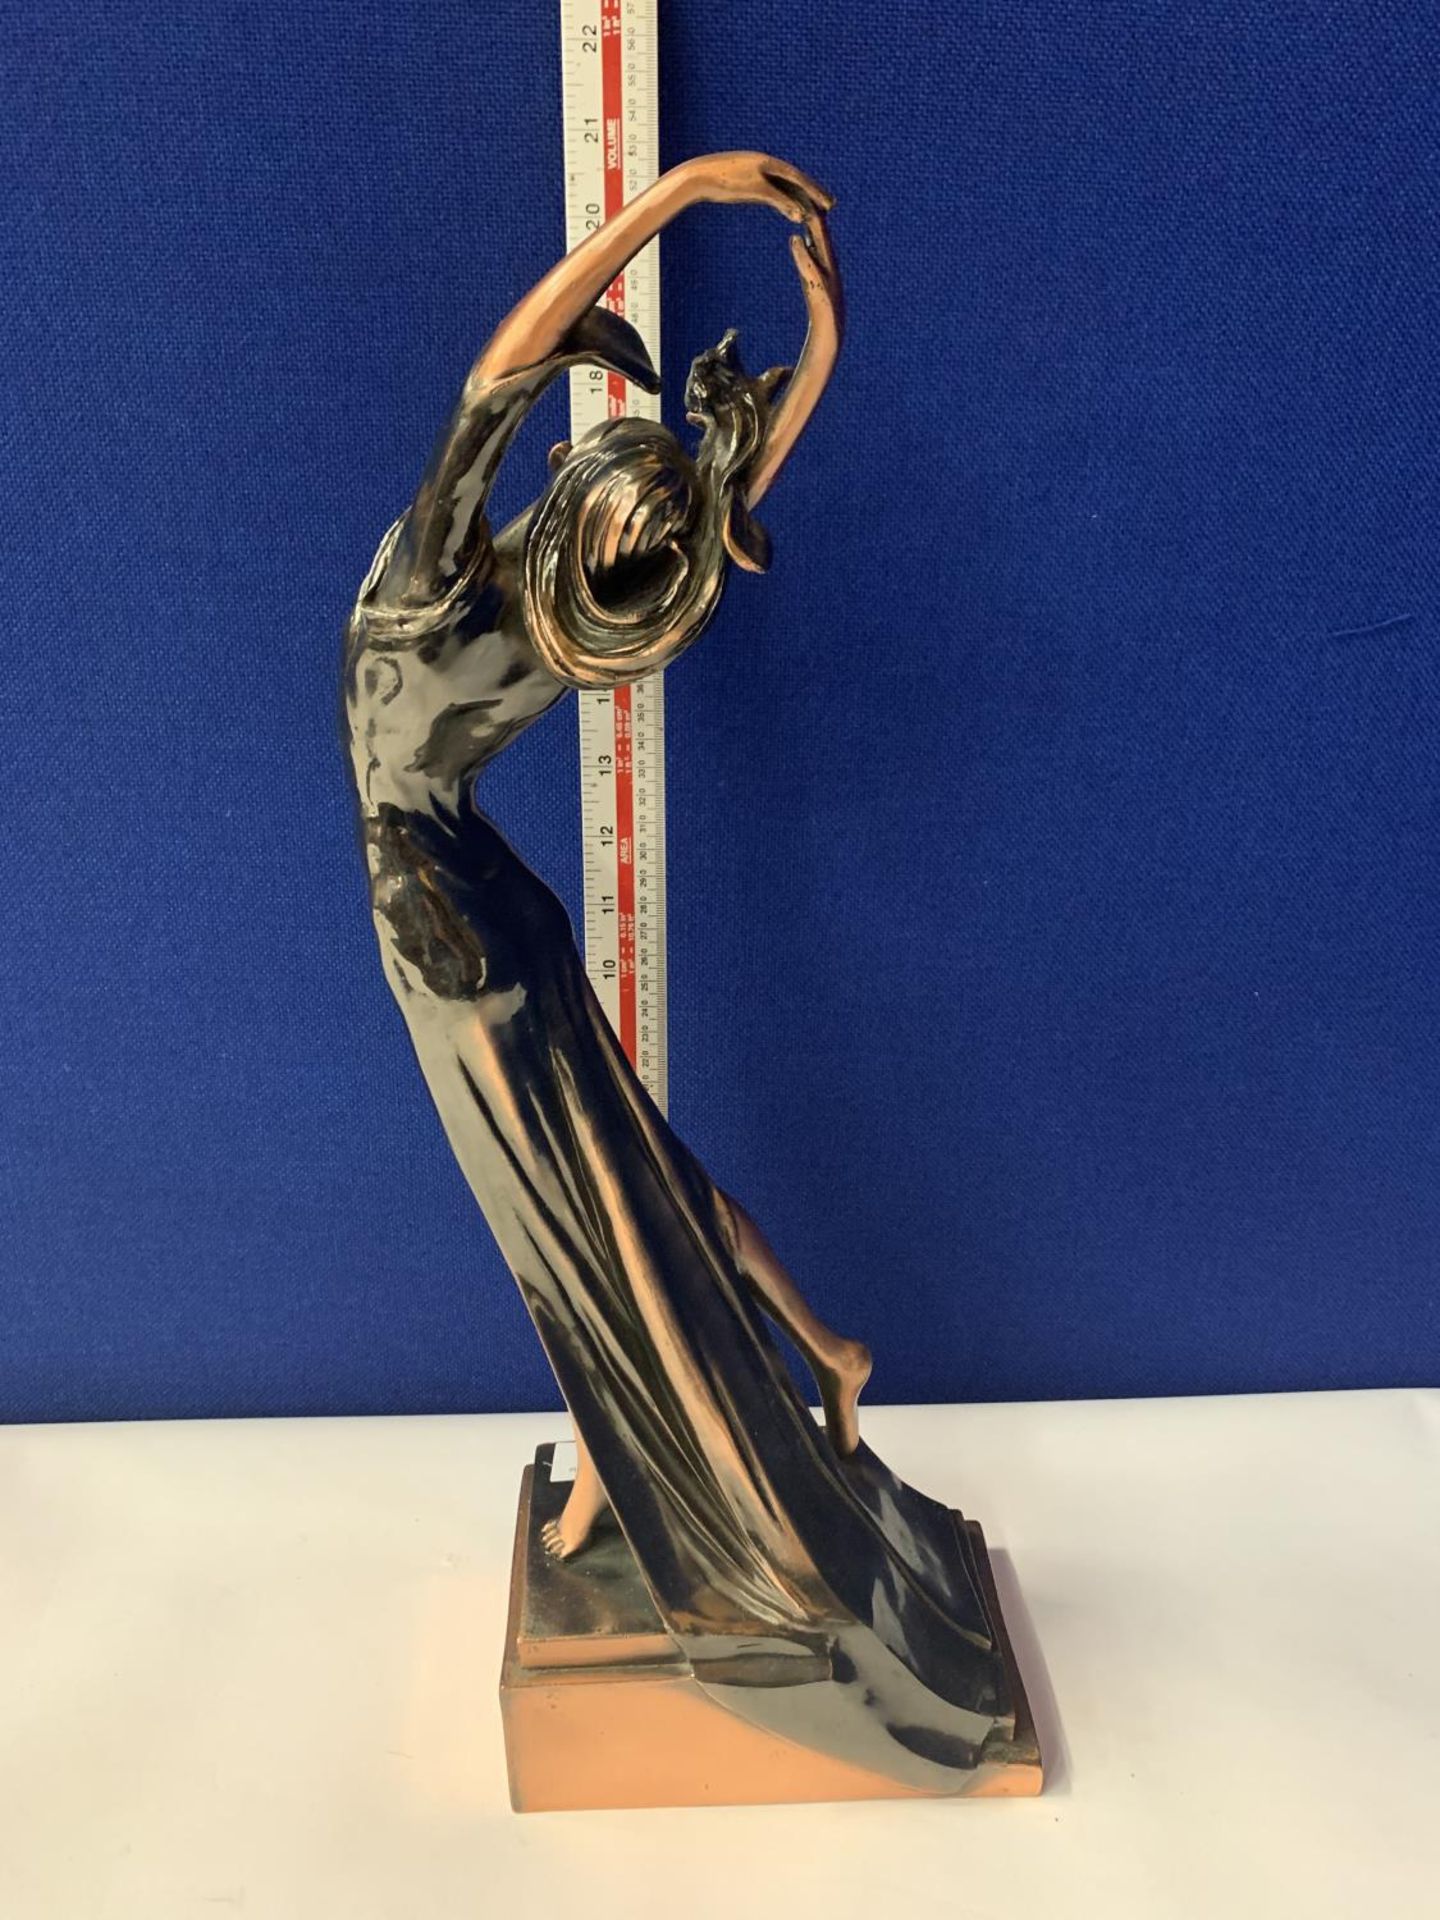 AN ART DECO STYLE RESIN DANCING LADY - Image 10 of 12